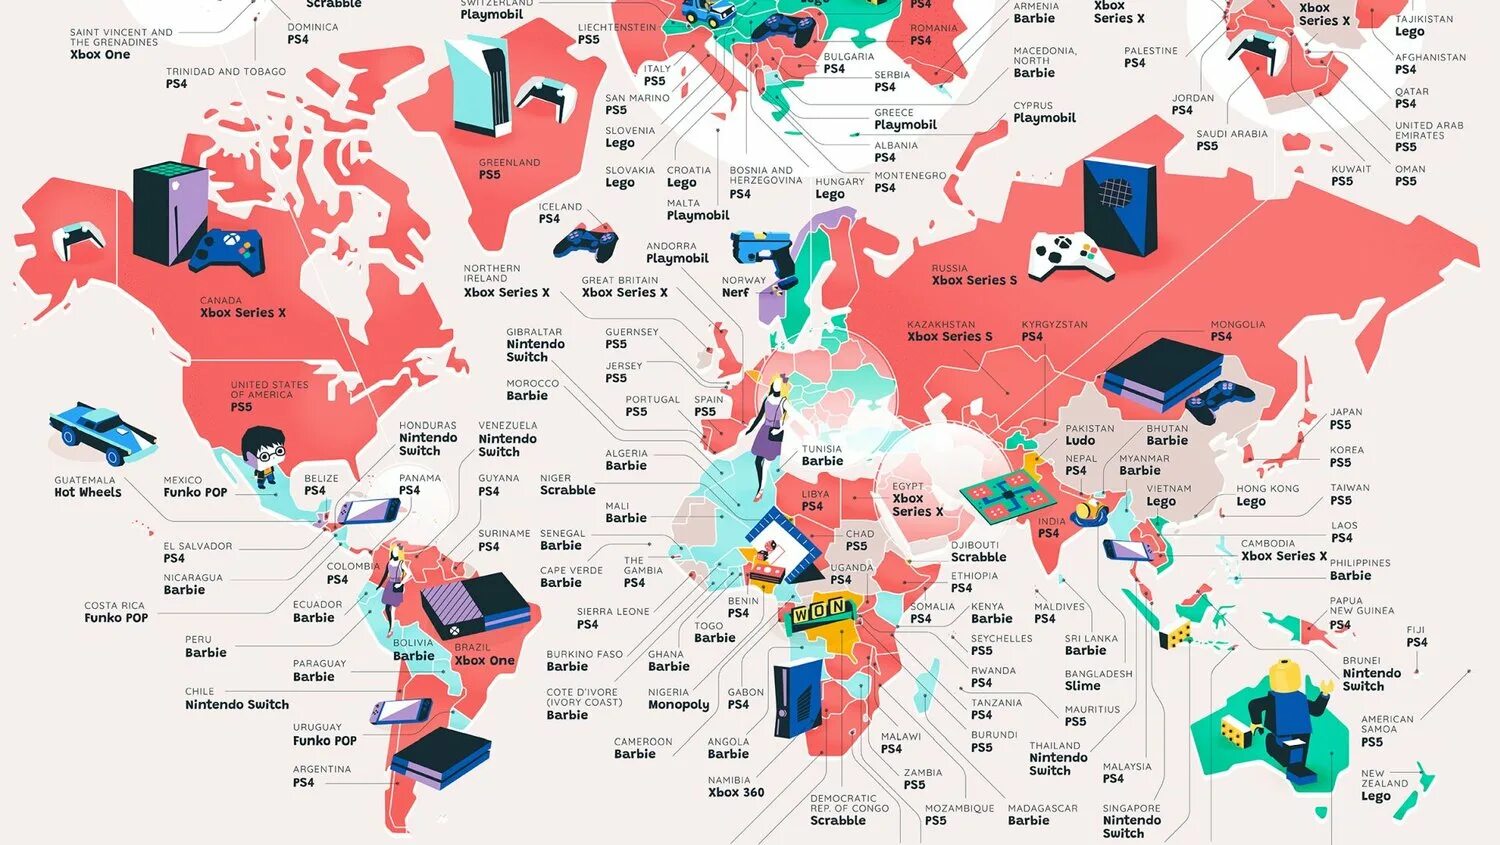 What is popular game. The most popular game in the World. Most popular game in each Country. Most popular game Map. Most popular games in the World in 2021.